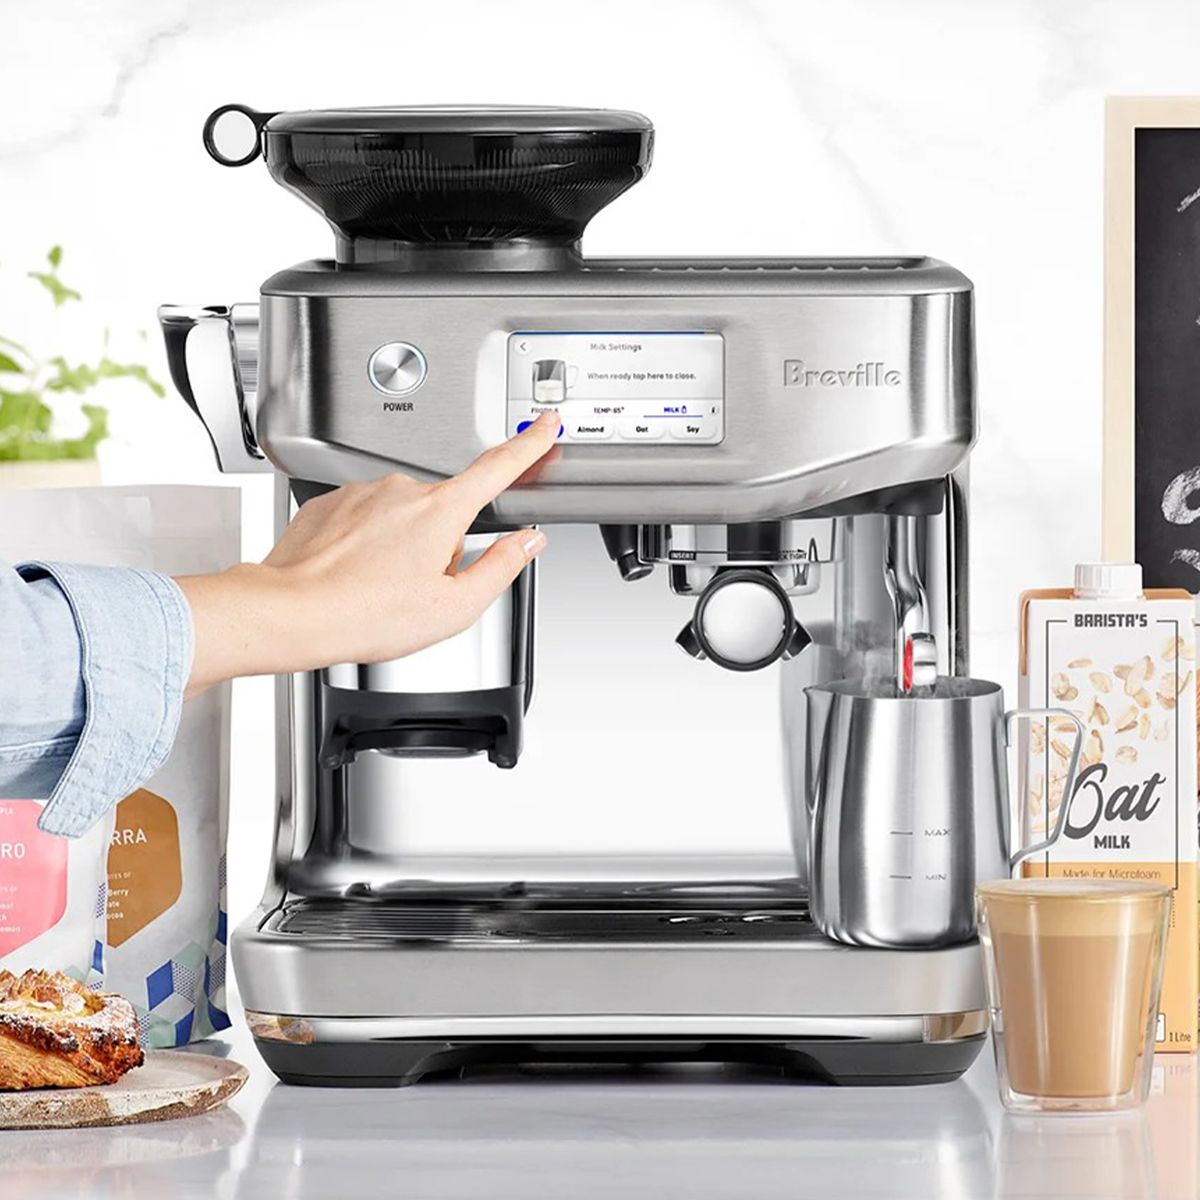 20 Best Coffee Bar Accessories of 2023 [Updated]